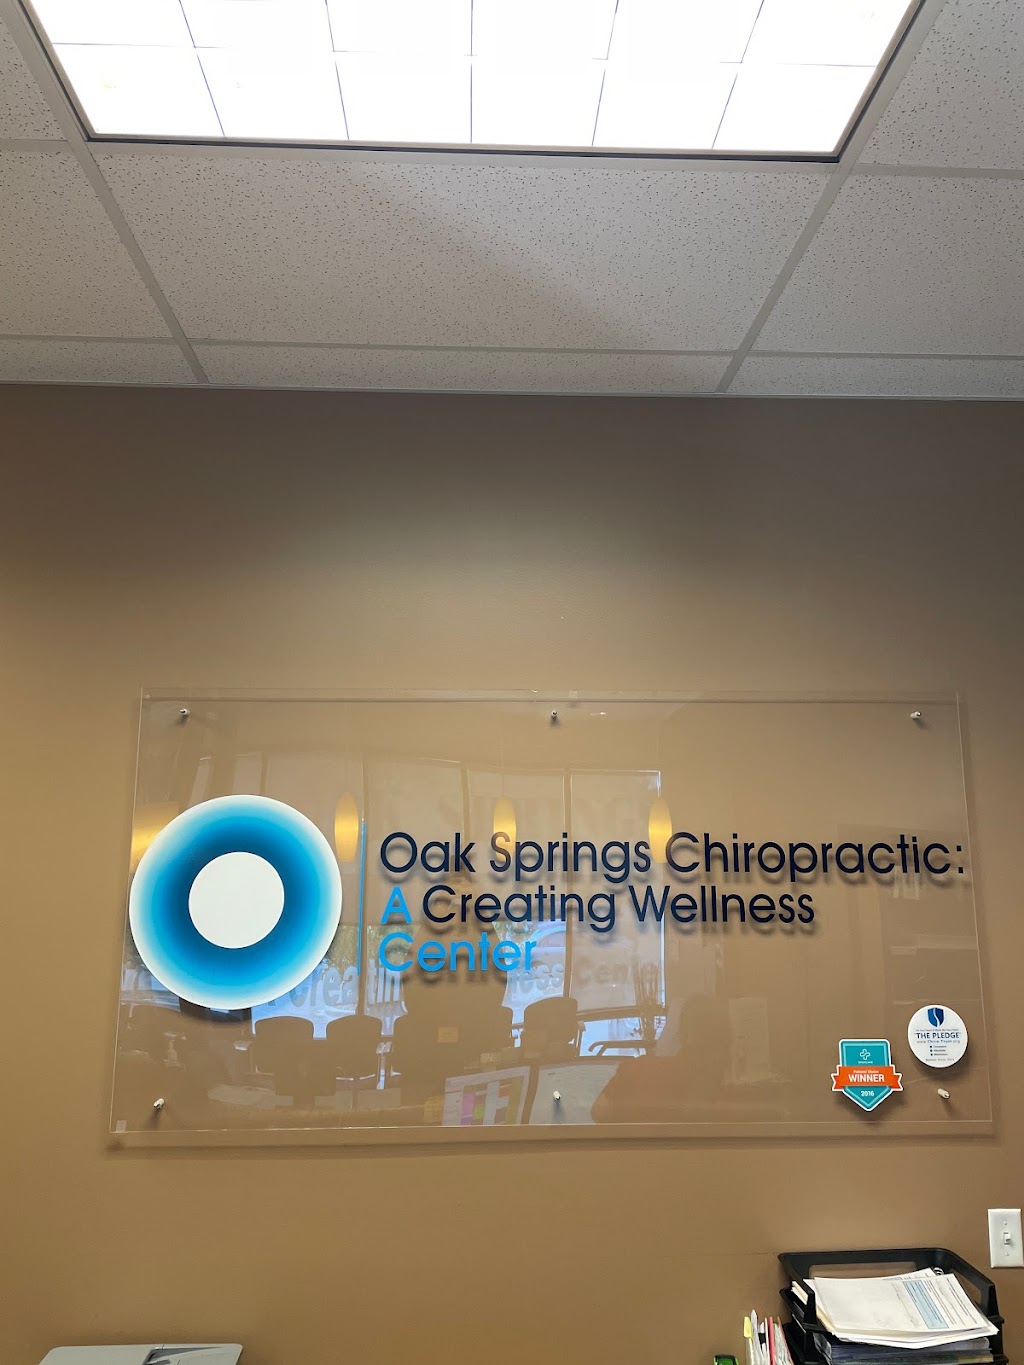 Oak Springs Chiropractic: A Creating Wellness Center | 1015 Helmo Ave N, Oakdale, MN 55128, USA | Phone: (651) 739-2500